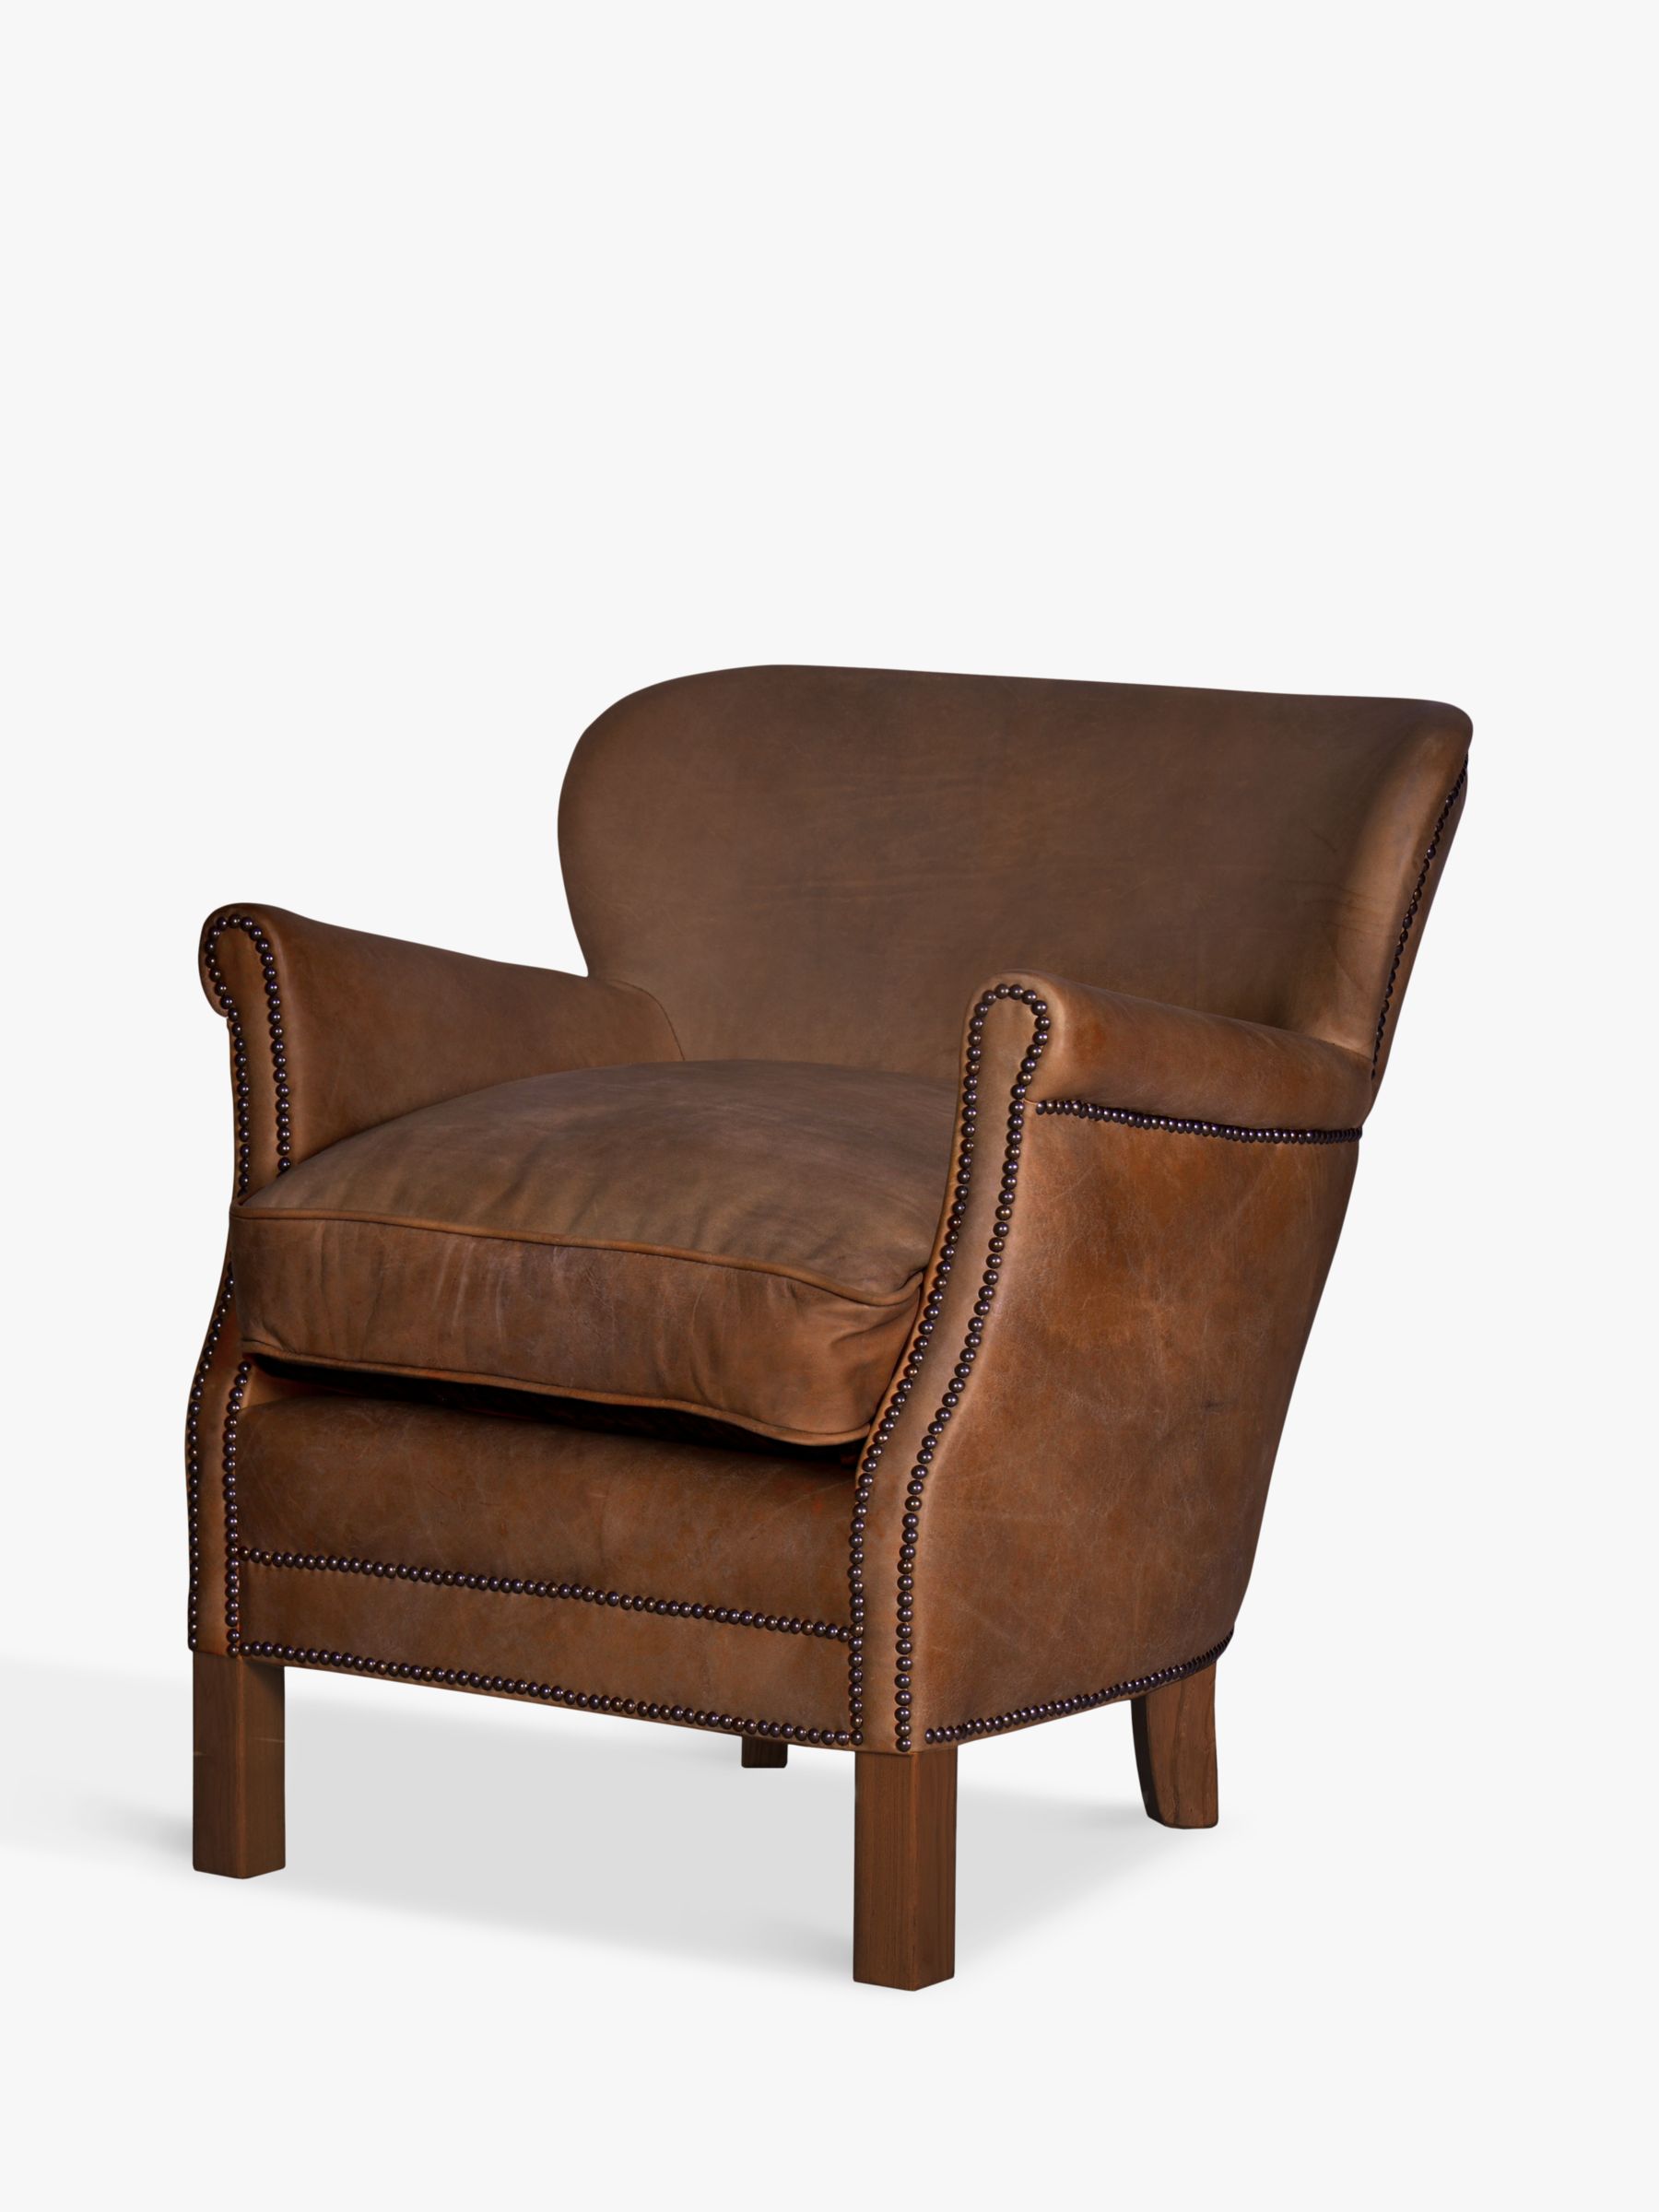 Halo Little Professor Leather Armchair, Antique Whisky at John Lewis